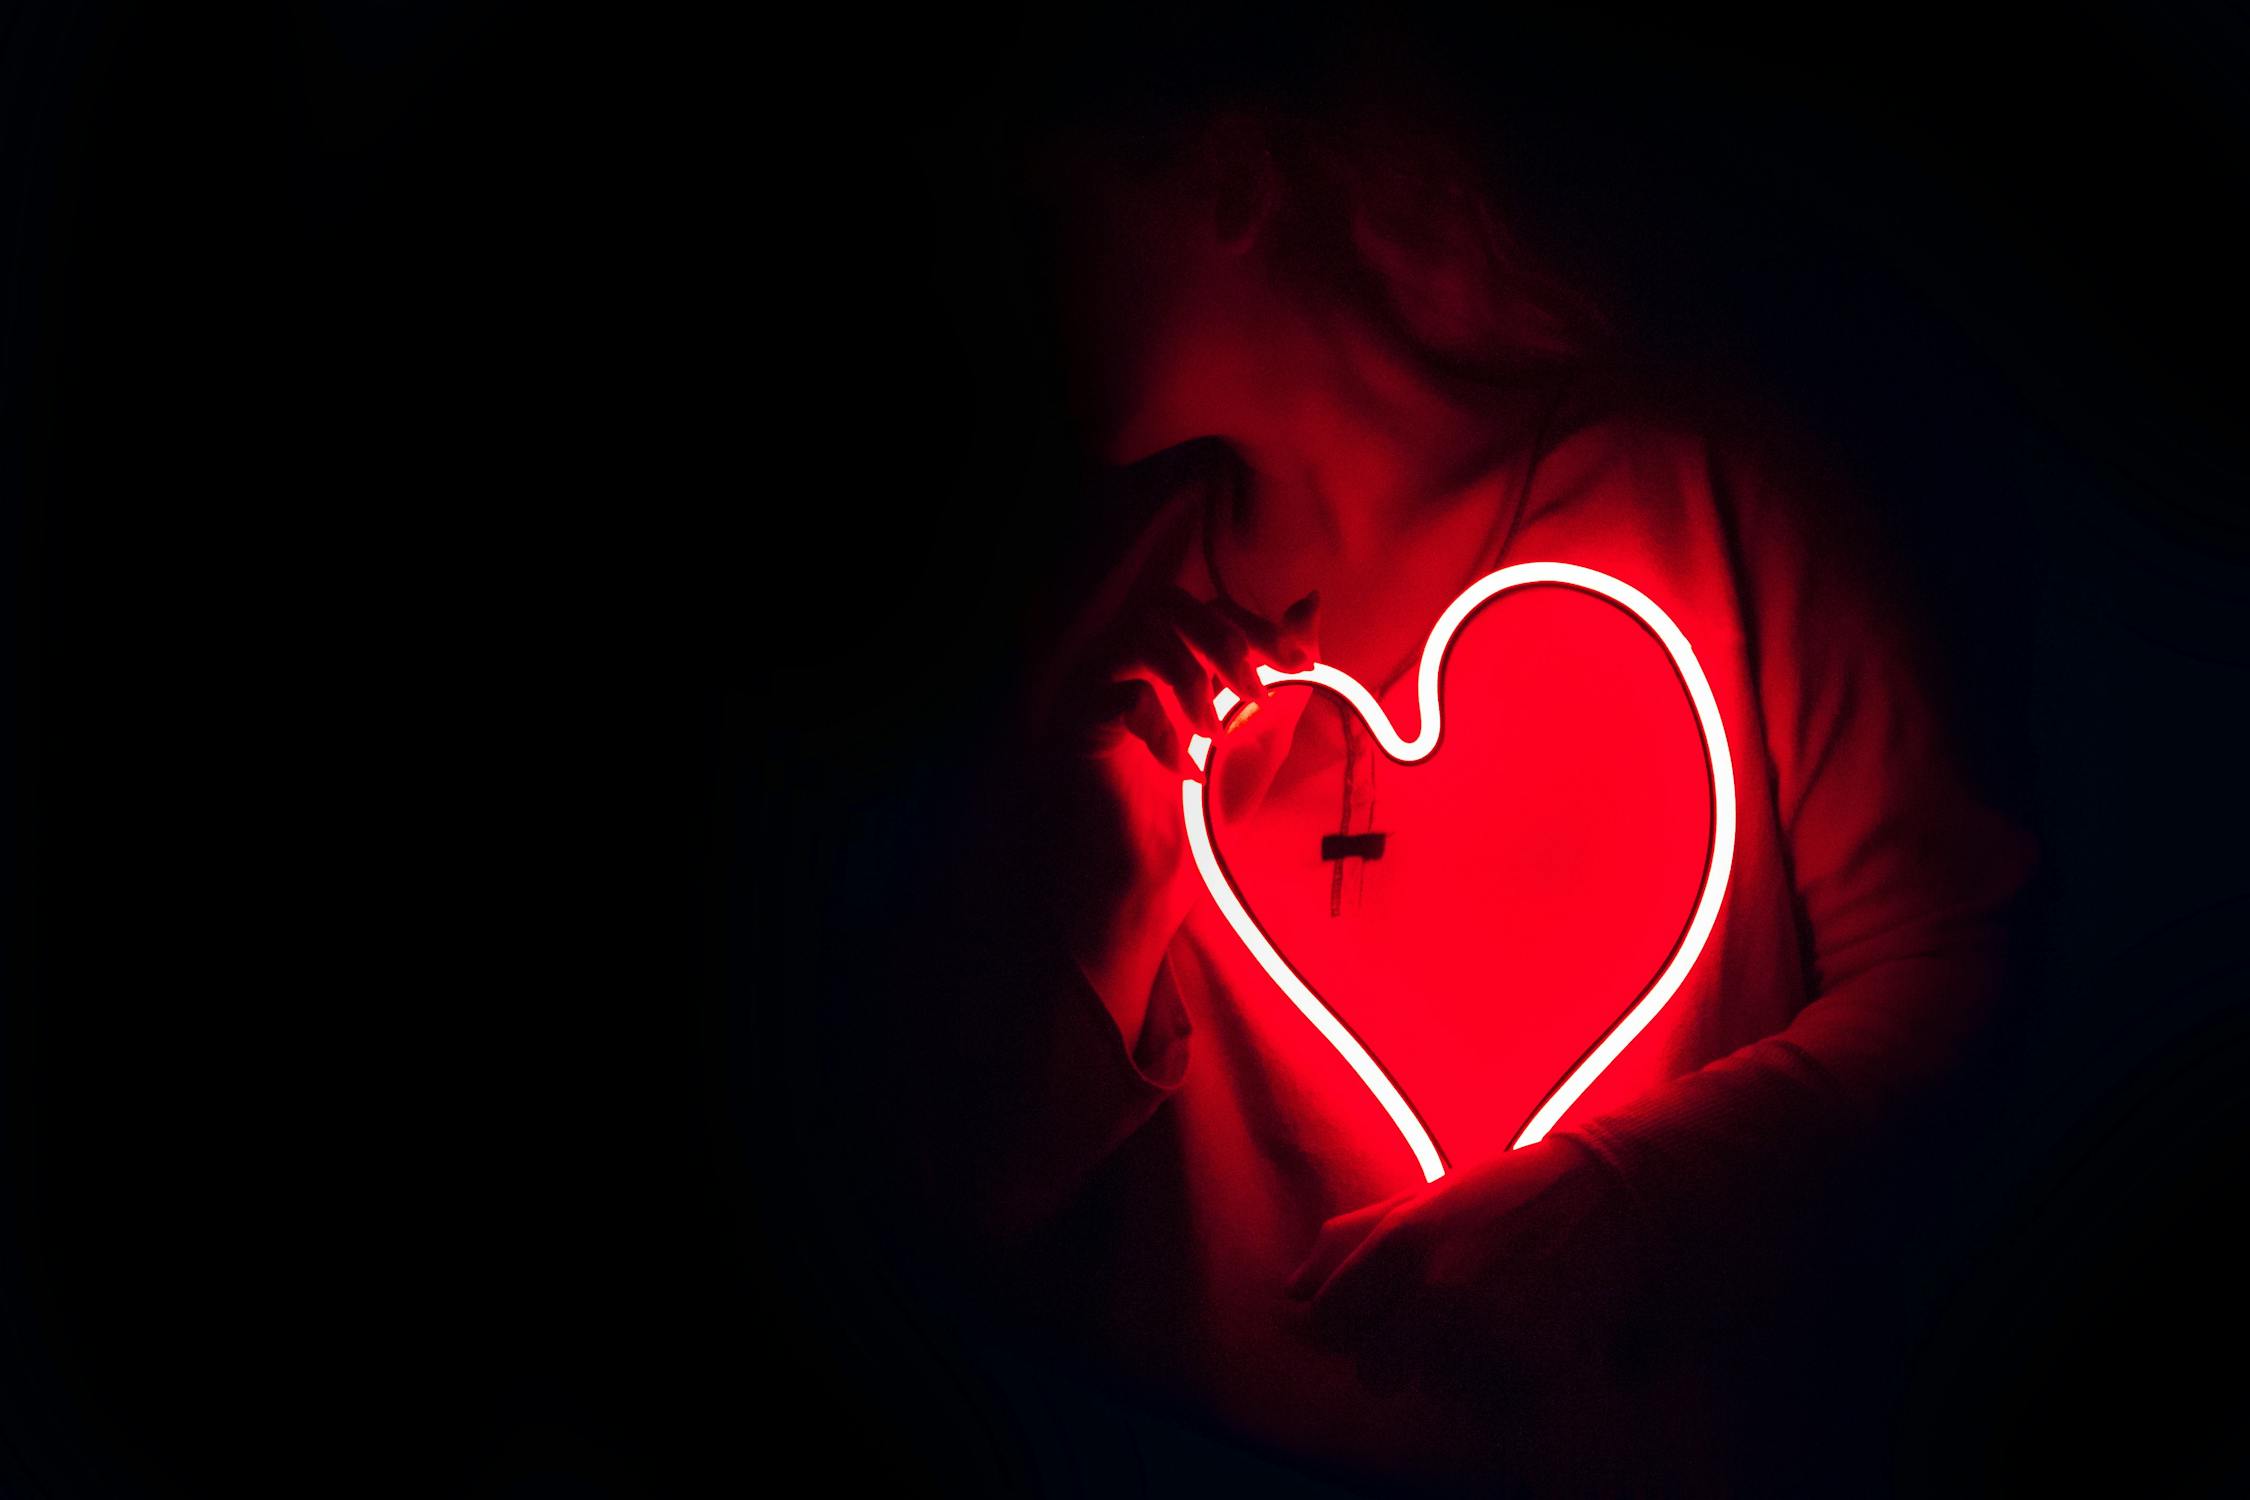 Heart Photo by Designecologist from Pexels